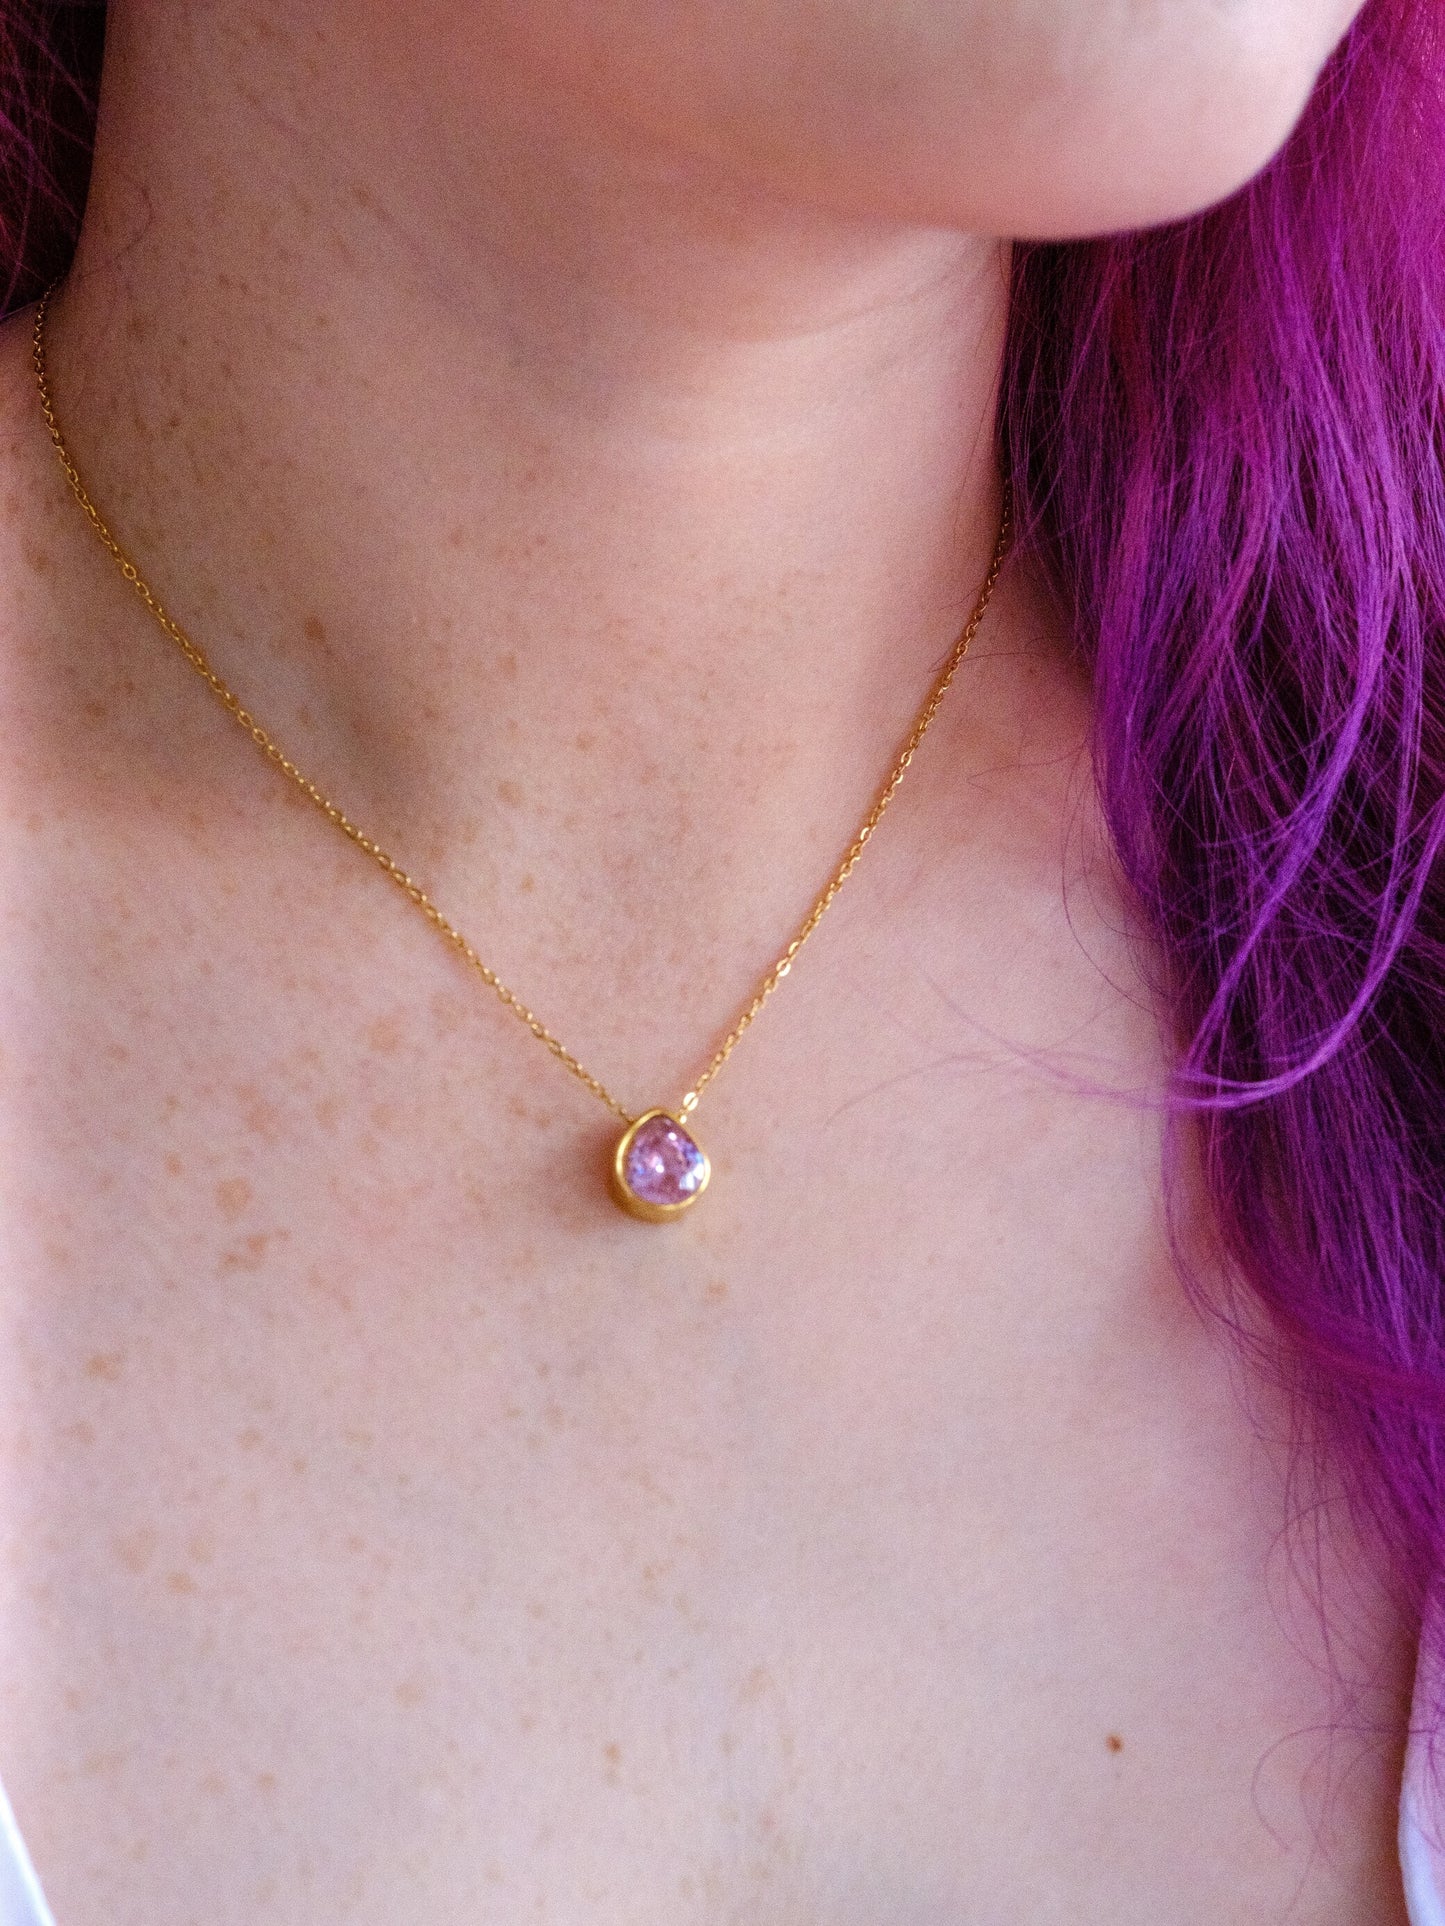 A woman with bright purple hair wears a gold necklace with a teardrop pendant set with a pale pink stone